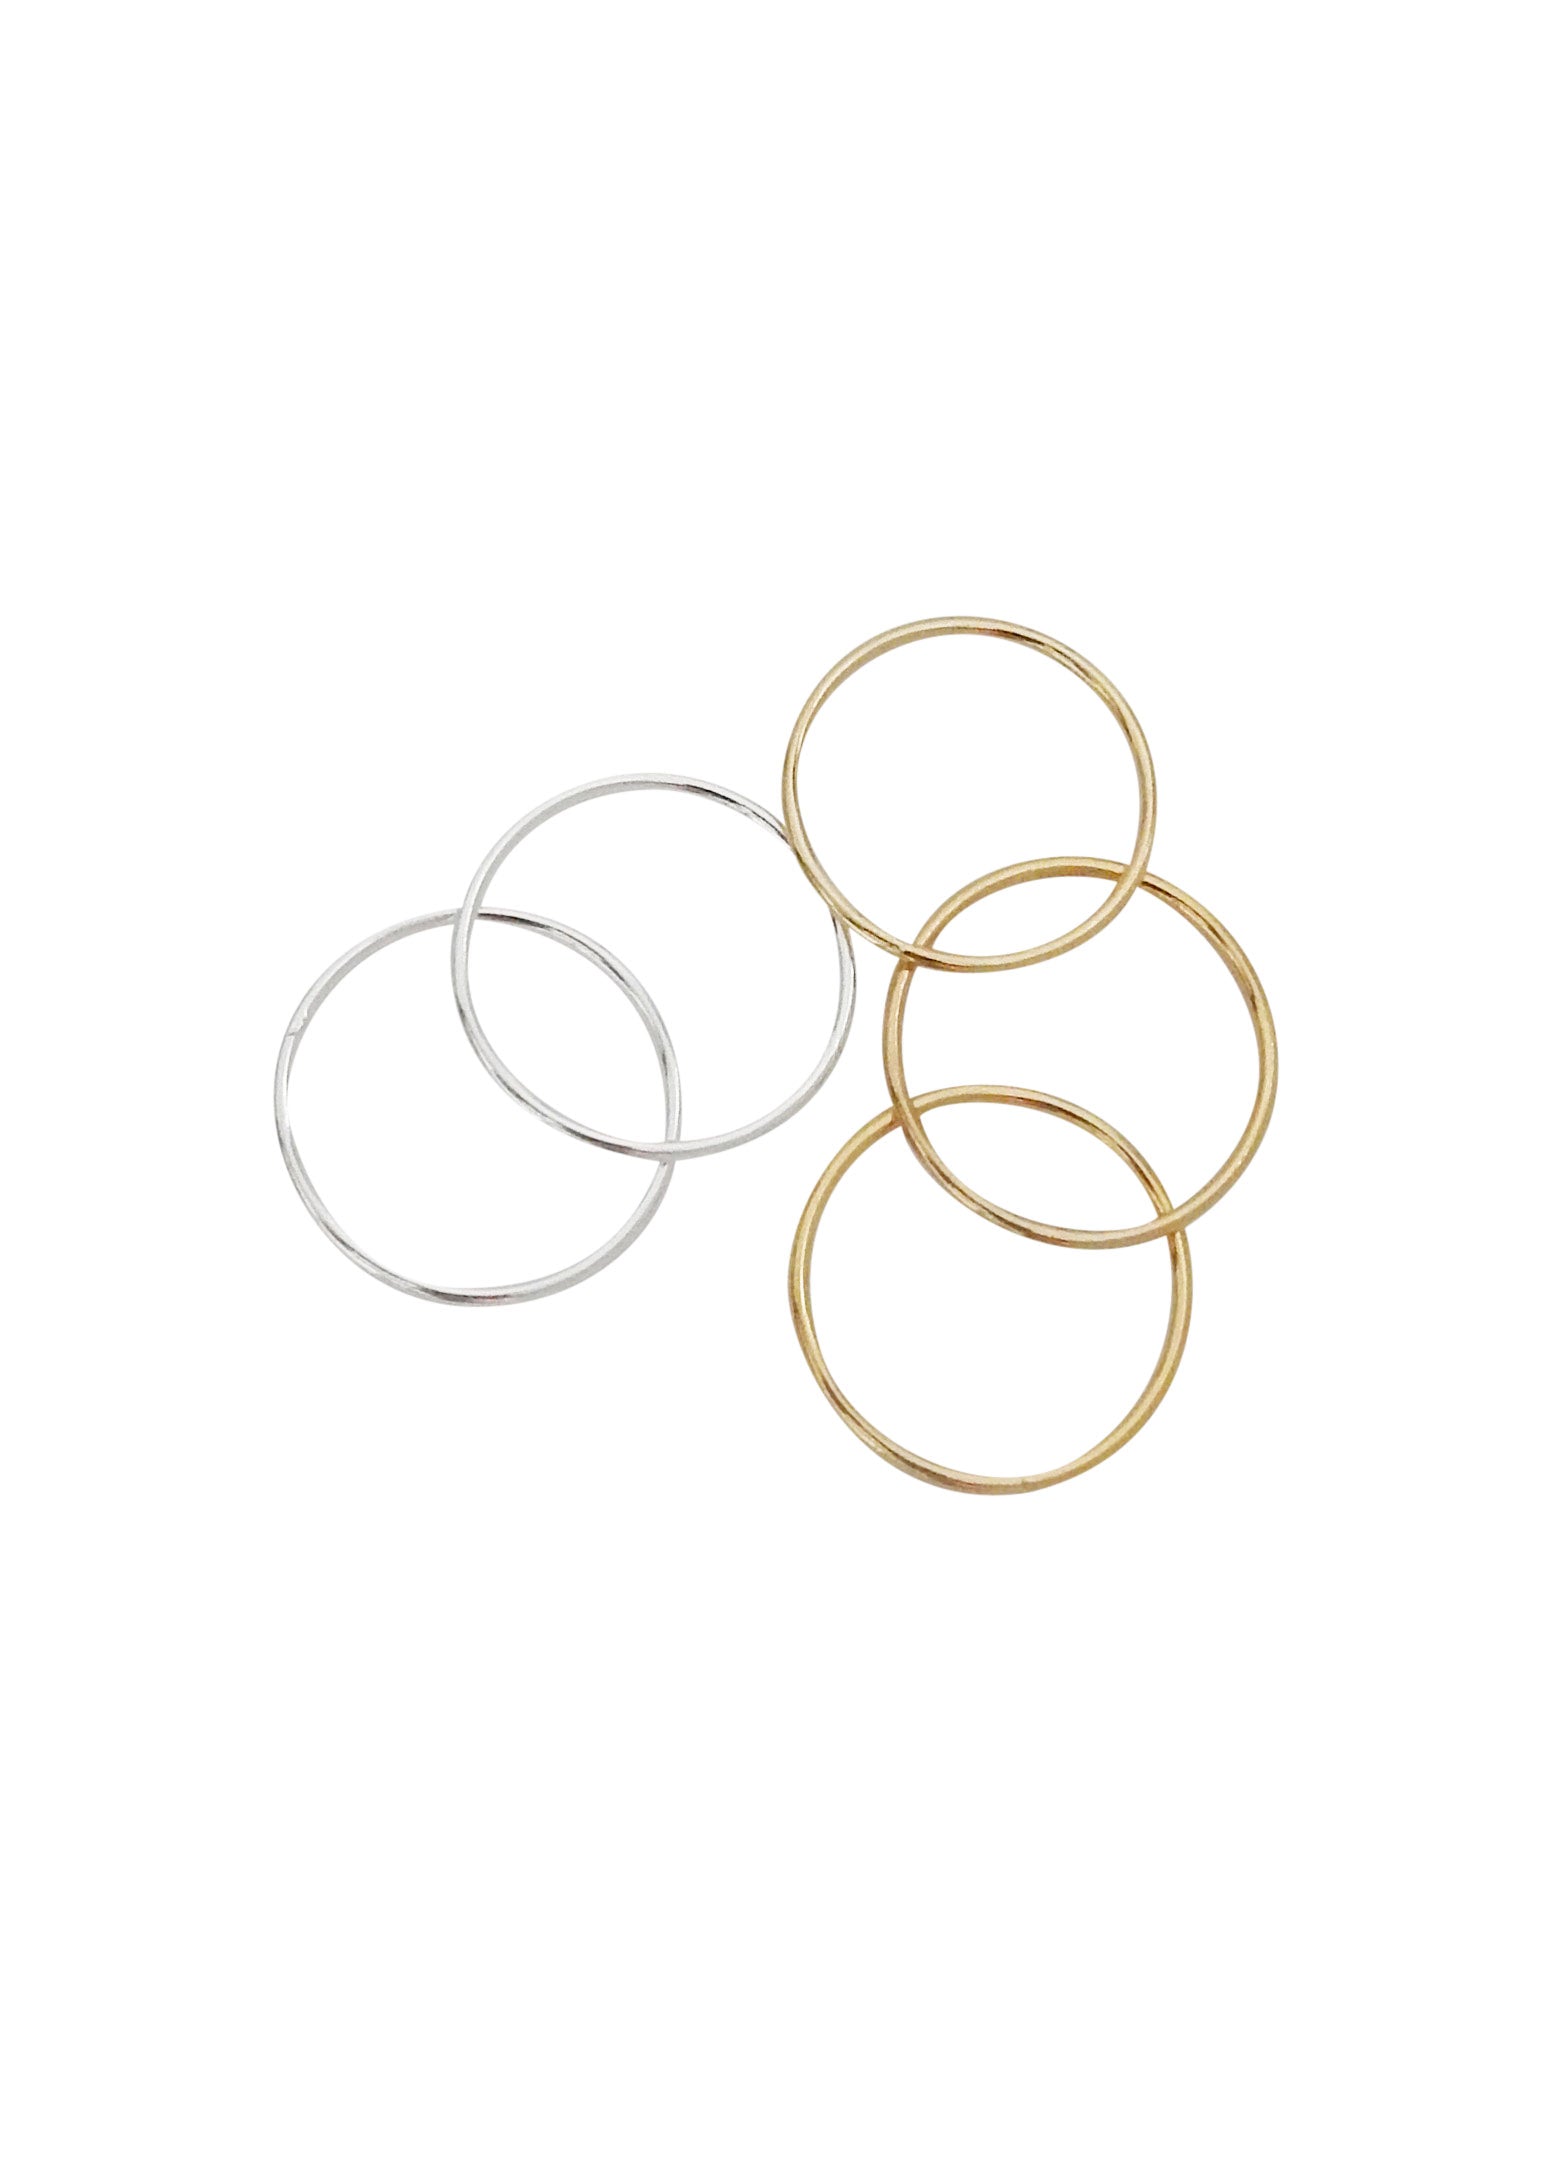 Apostle In House Collection  |  Minimalist Shine Ring, Gold